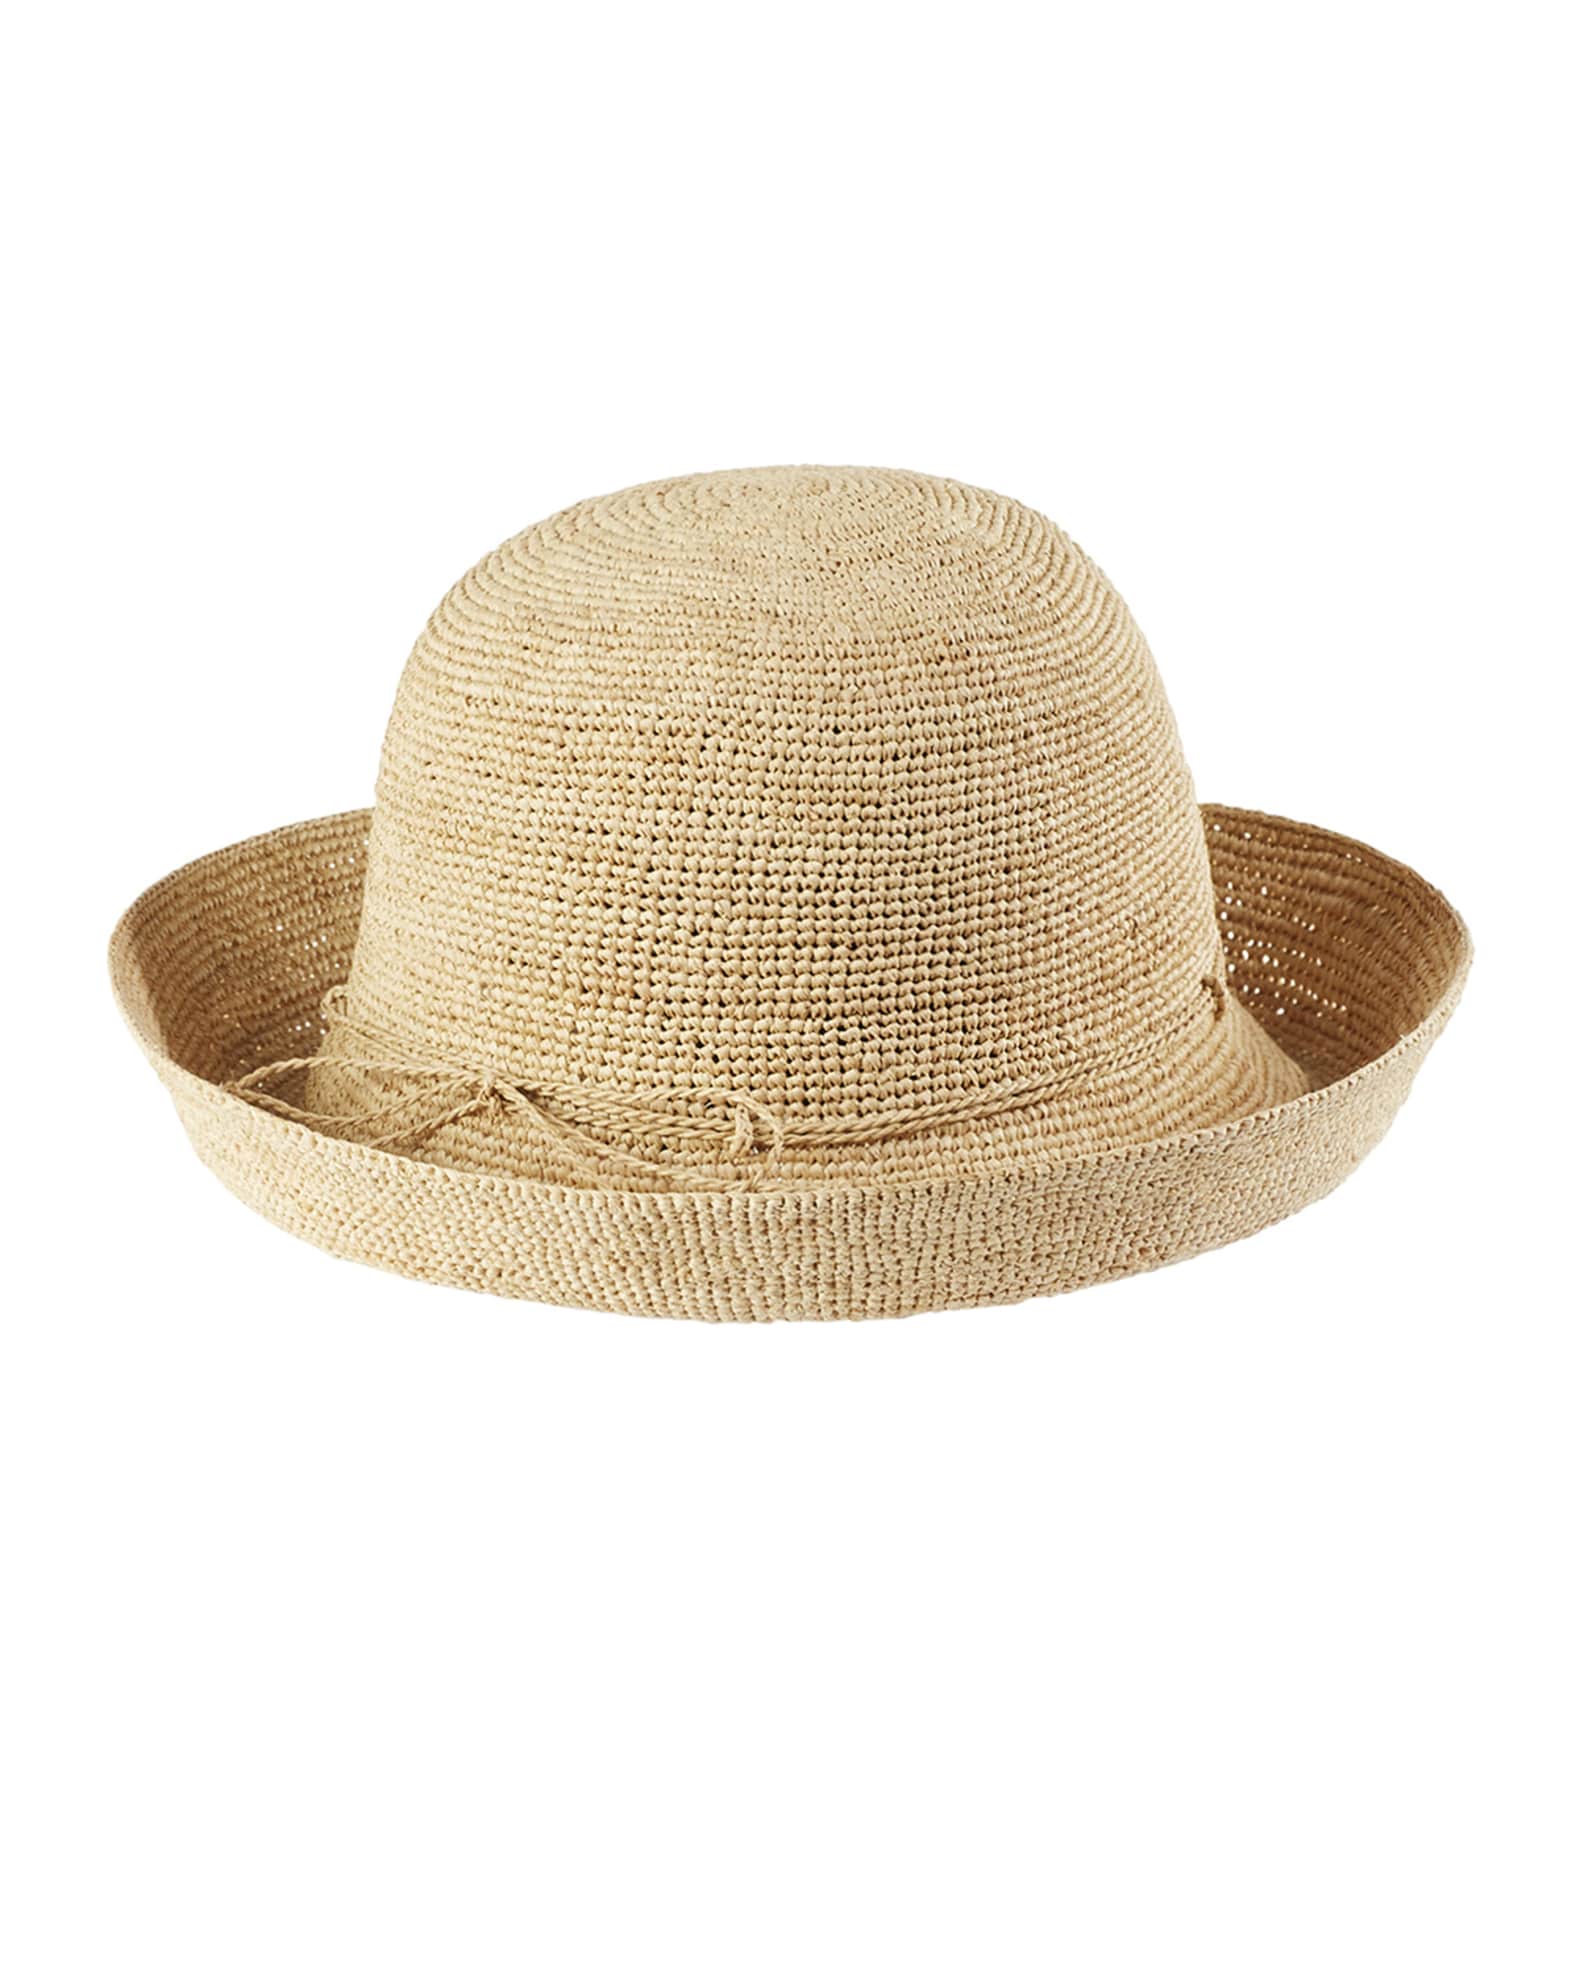 Sunhat - Straw - Light coloured straw hat with a yellow ribbon - Molo